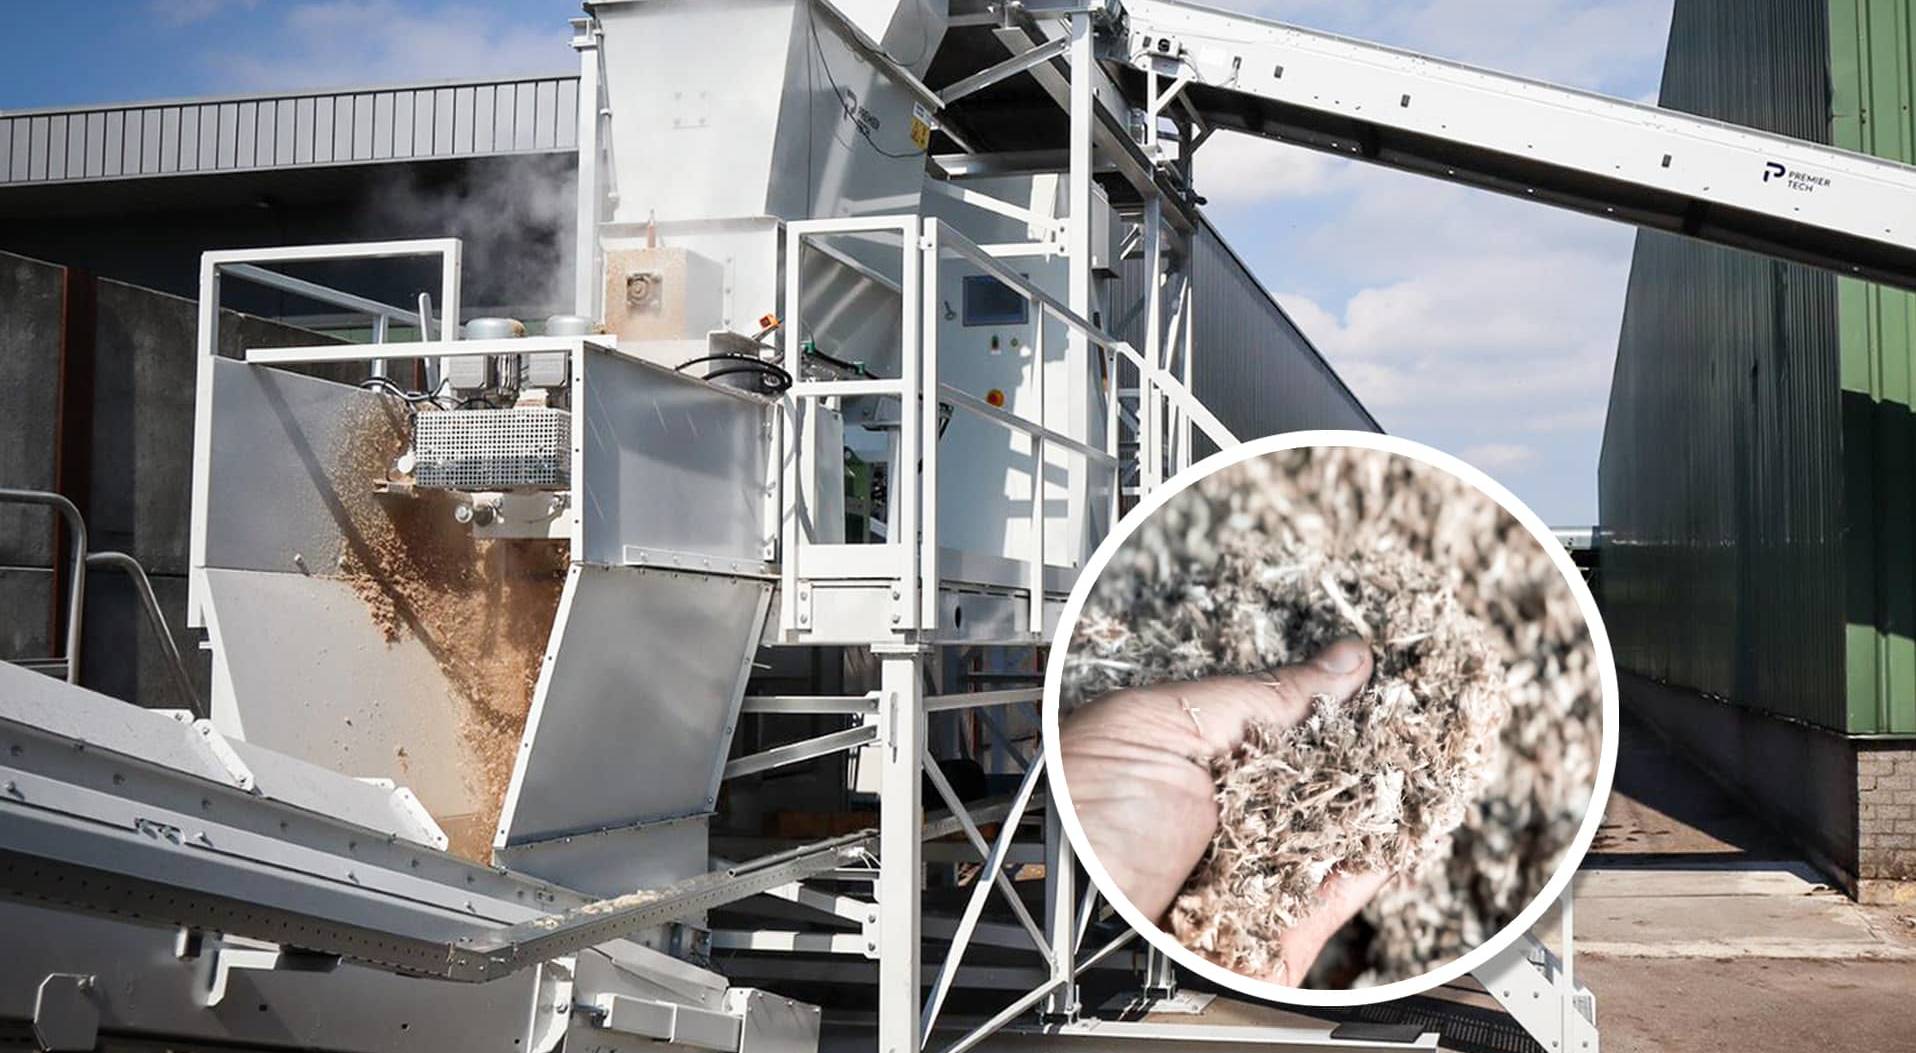 Image of a wood fiber machine in action and close up on wood fiber material in a person's hands